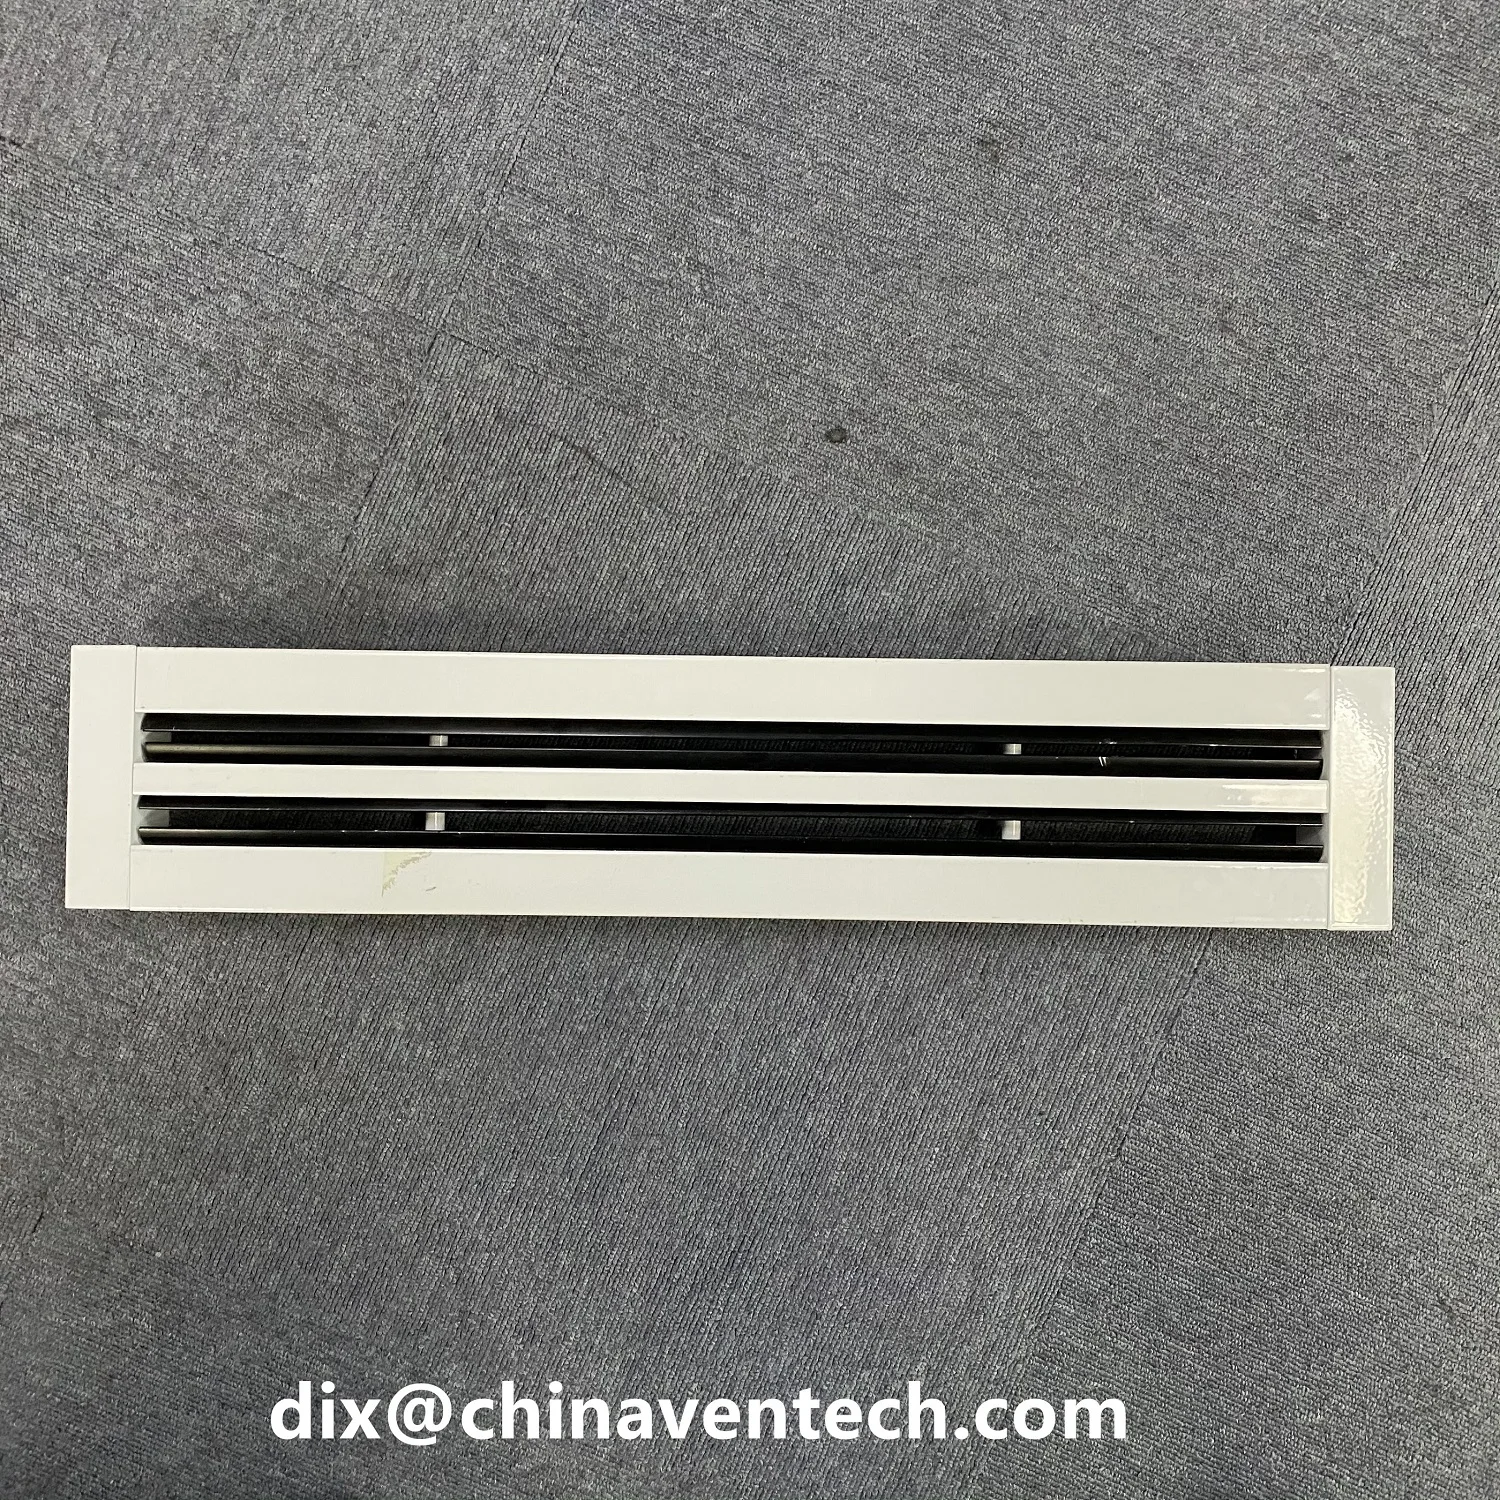 Hvac air terminals round duct extract air ceiling linear slot diffuser with plenum box